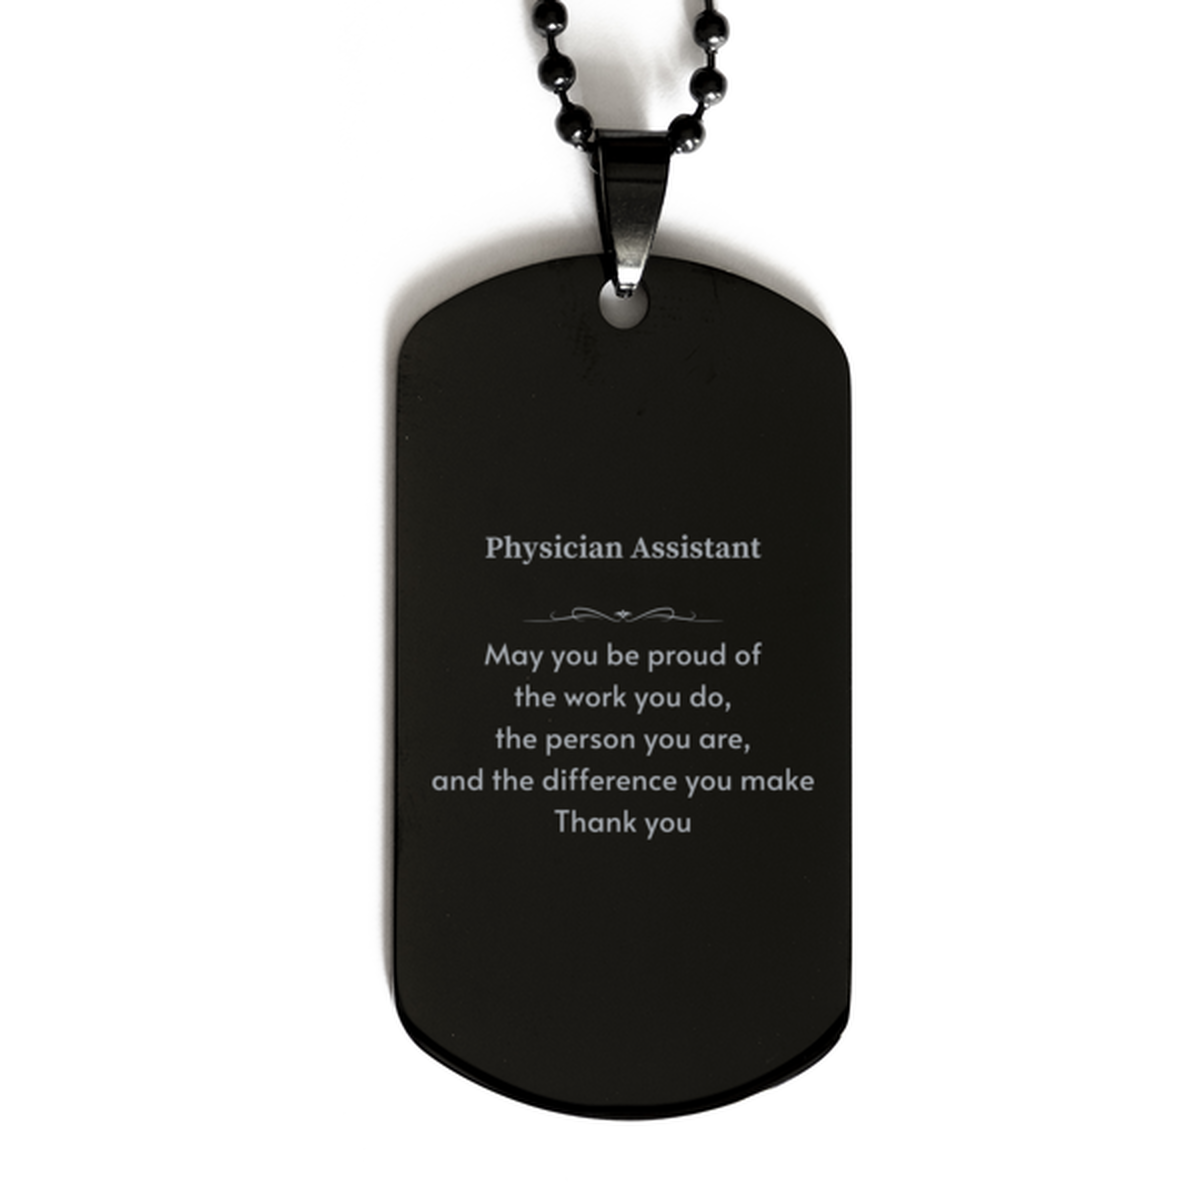 Heartwarming Black Dog Tag Retirement Coworkers Gifts for Physician Assistant, Physician Assistant May You be proud of the work you do, the person you are Gifts for Boss Men Women Friends